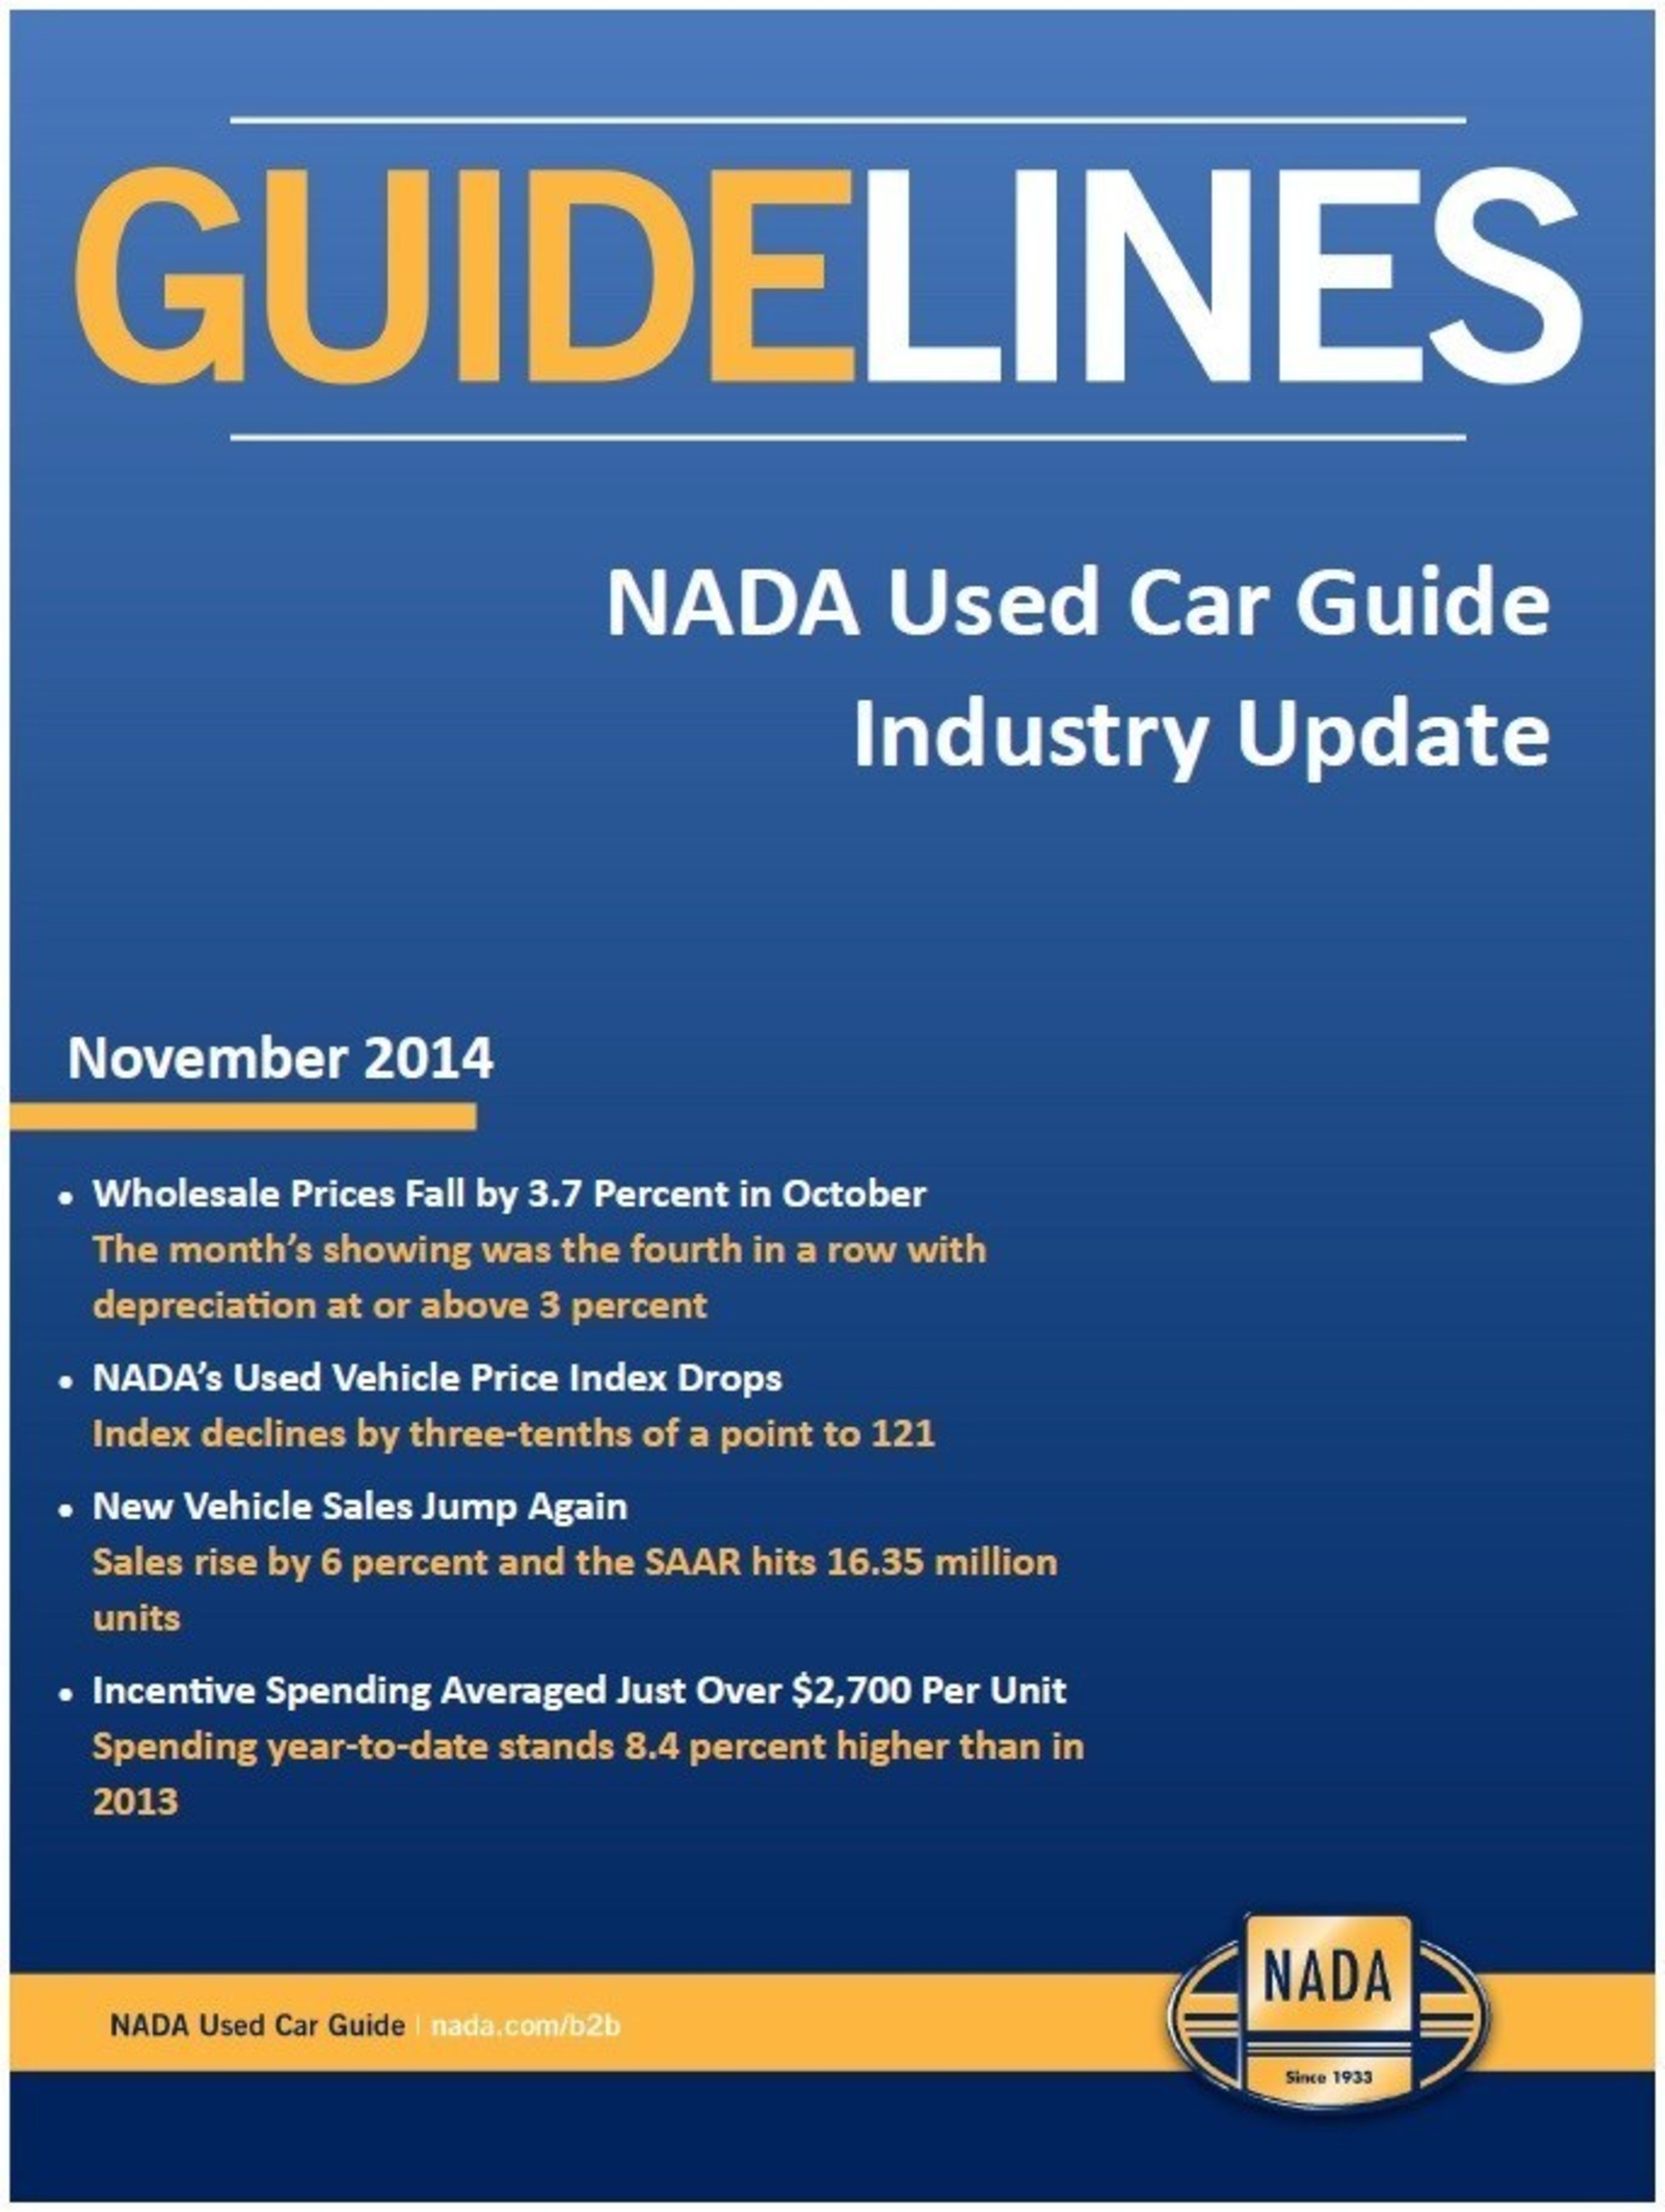 The Nov. 2014 edition of NADA Used Car Guide Guidelines report provides insightful forecasts, trends and historical information about the used and new vehicle market.